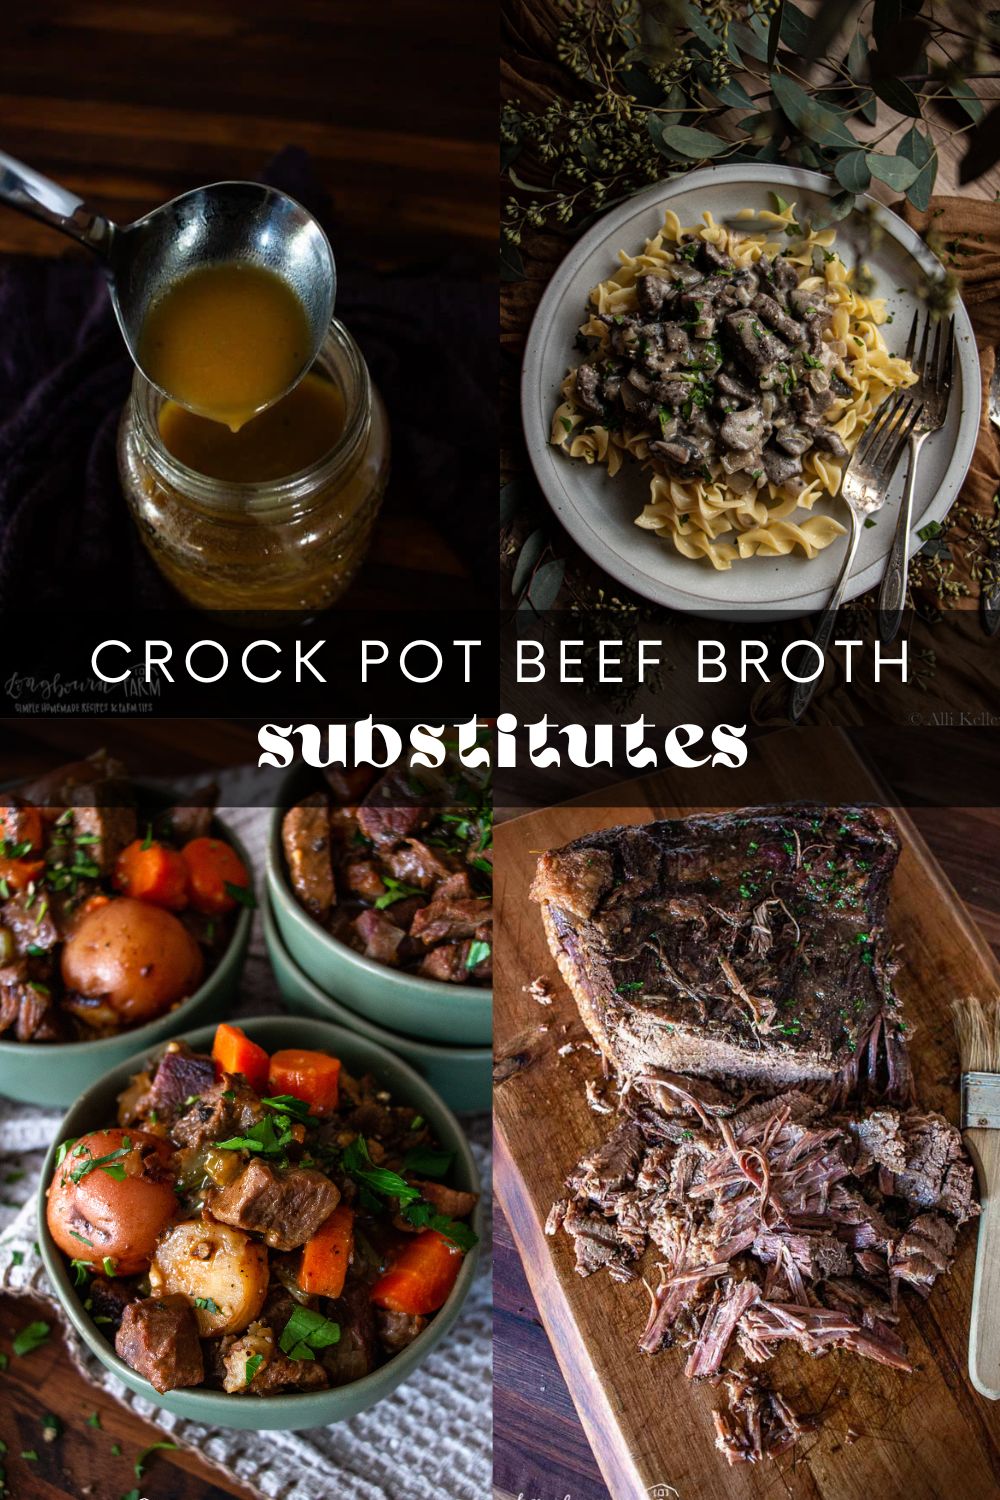 Many slow cooker recipes require beef broth as an ingredient, but you may not always have it to hand. And beef broth won't work out if you're cooking a vegetarian meal! Thankfully, there are tons of great substitutes that’ll work just as well in your slow cooker. In fact, there's a good chance you already have the perfect substitute for beef broth in your pantry.